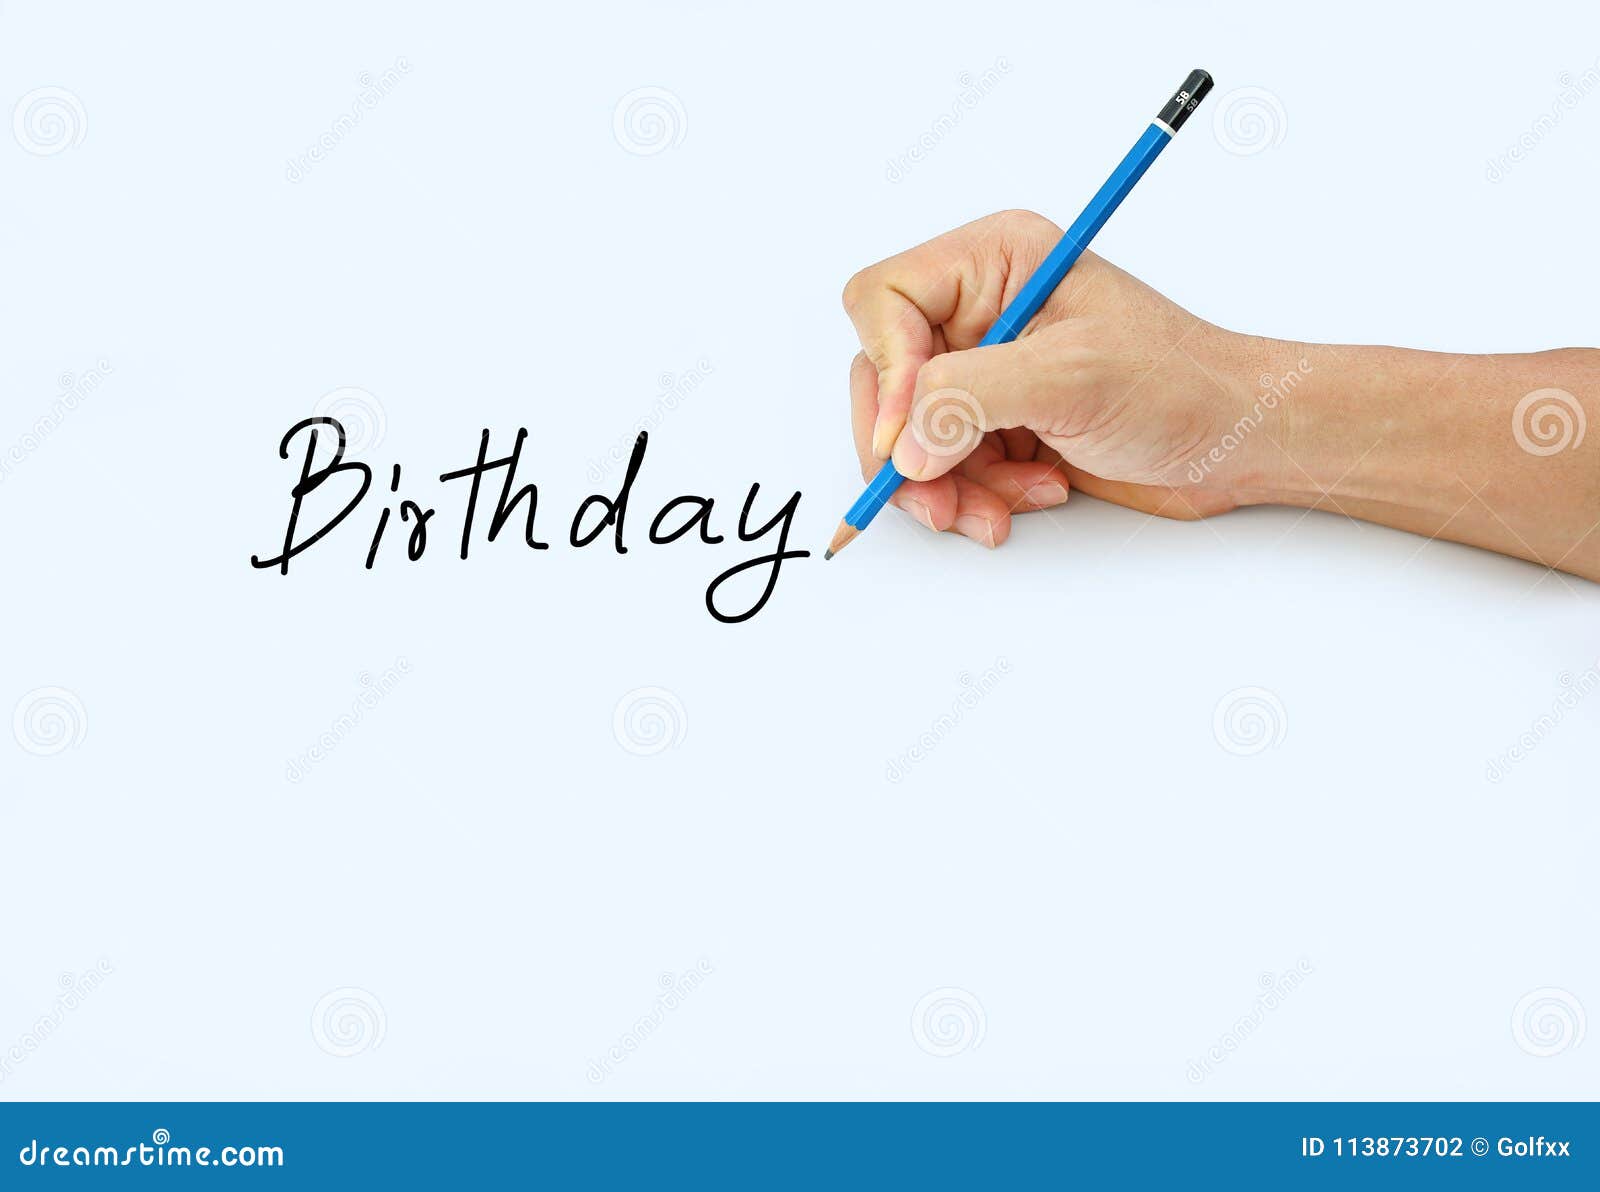 Hand Holding a Pencil on a White Paper Background, Writing with Pencil ...